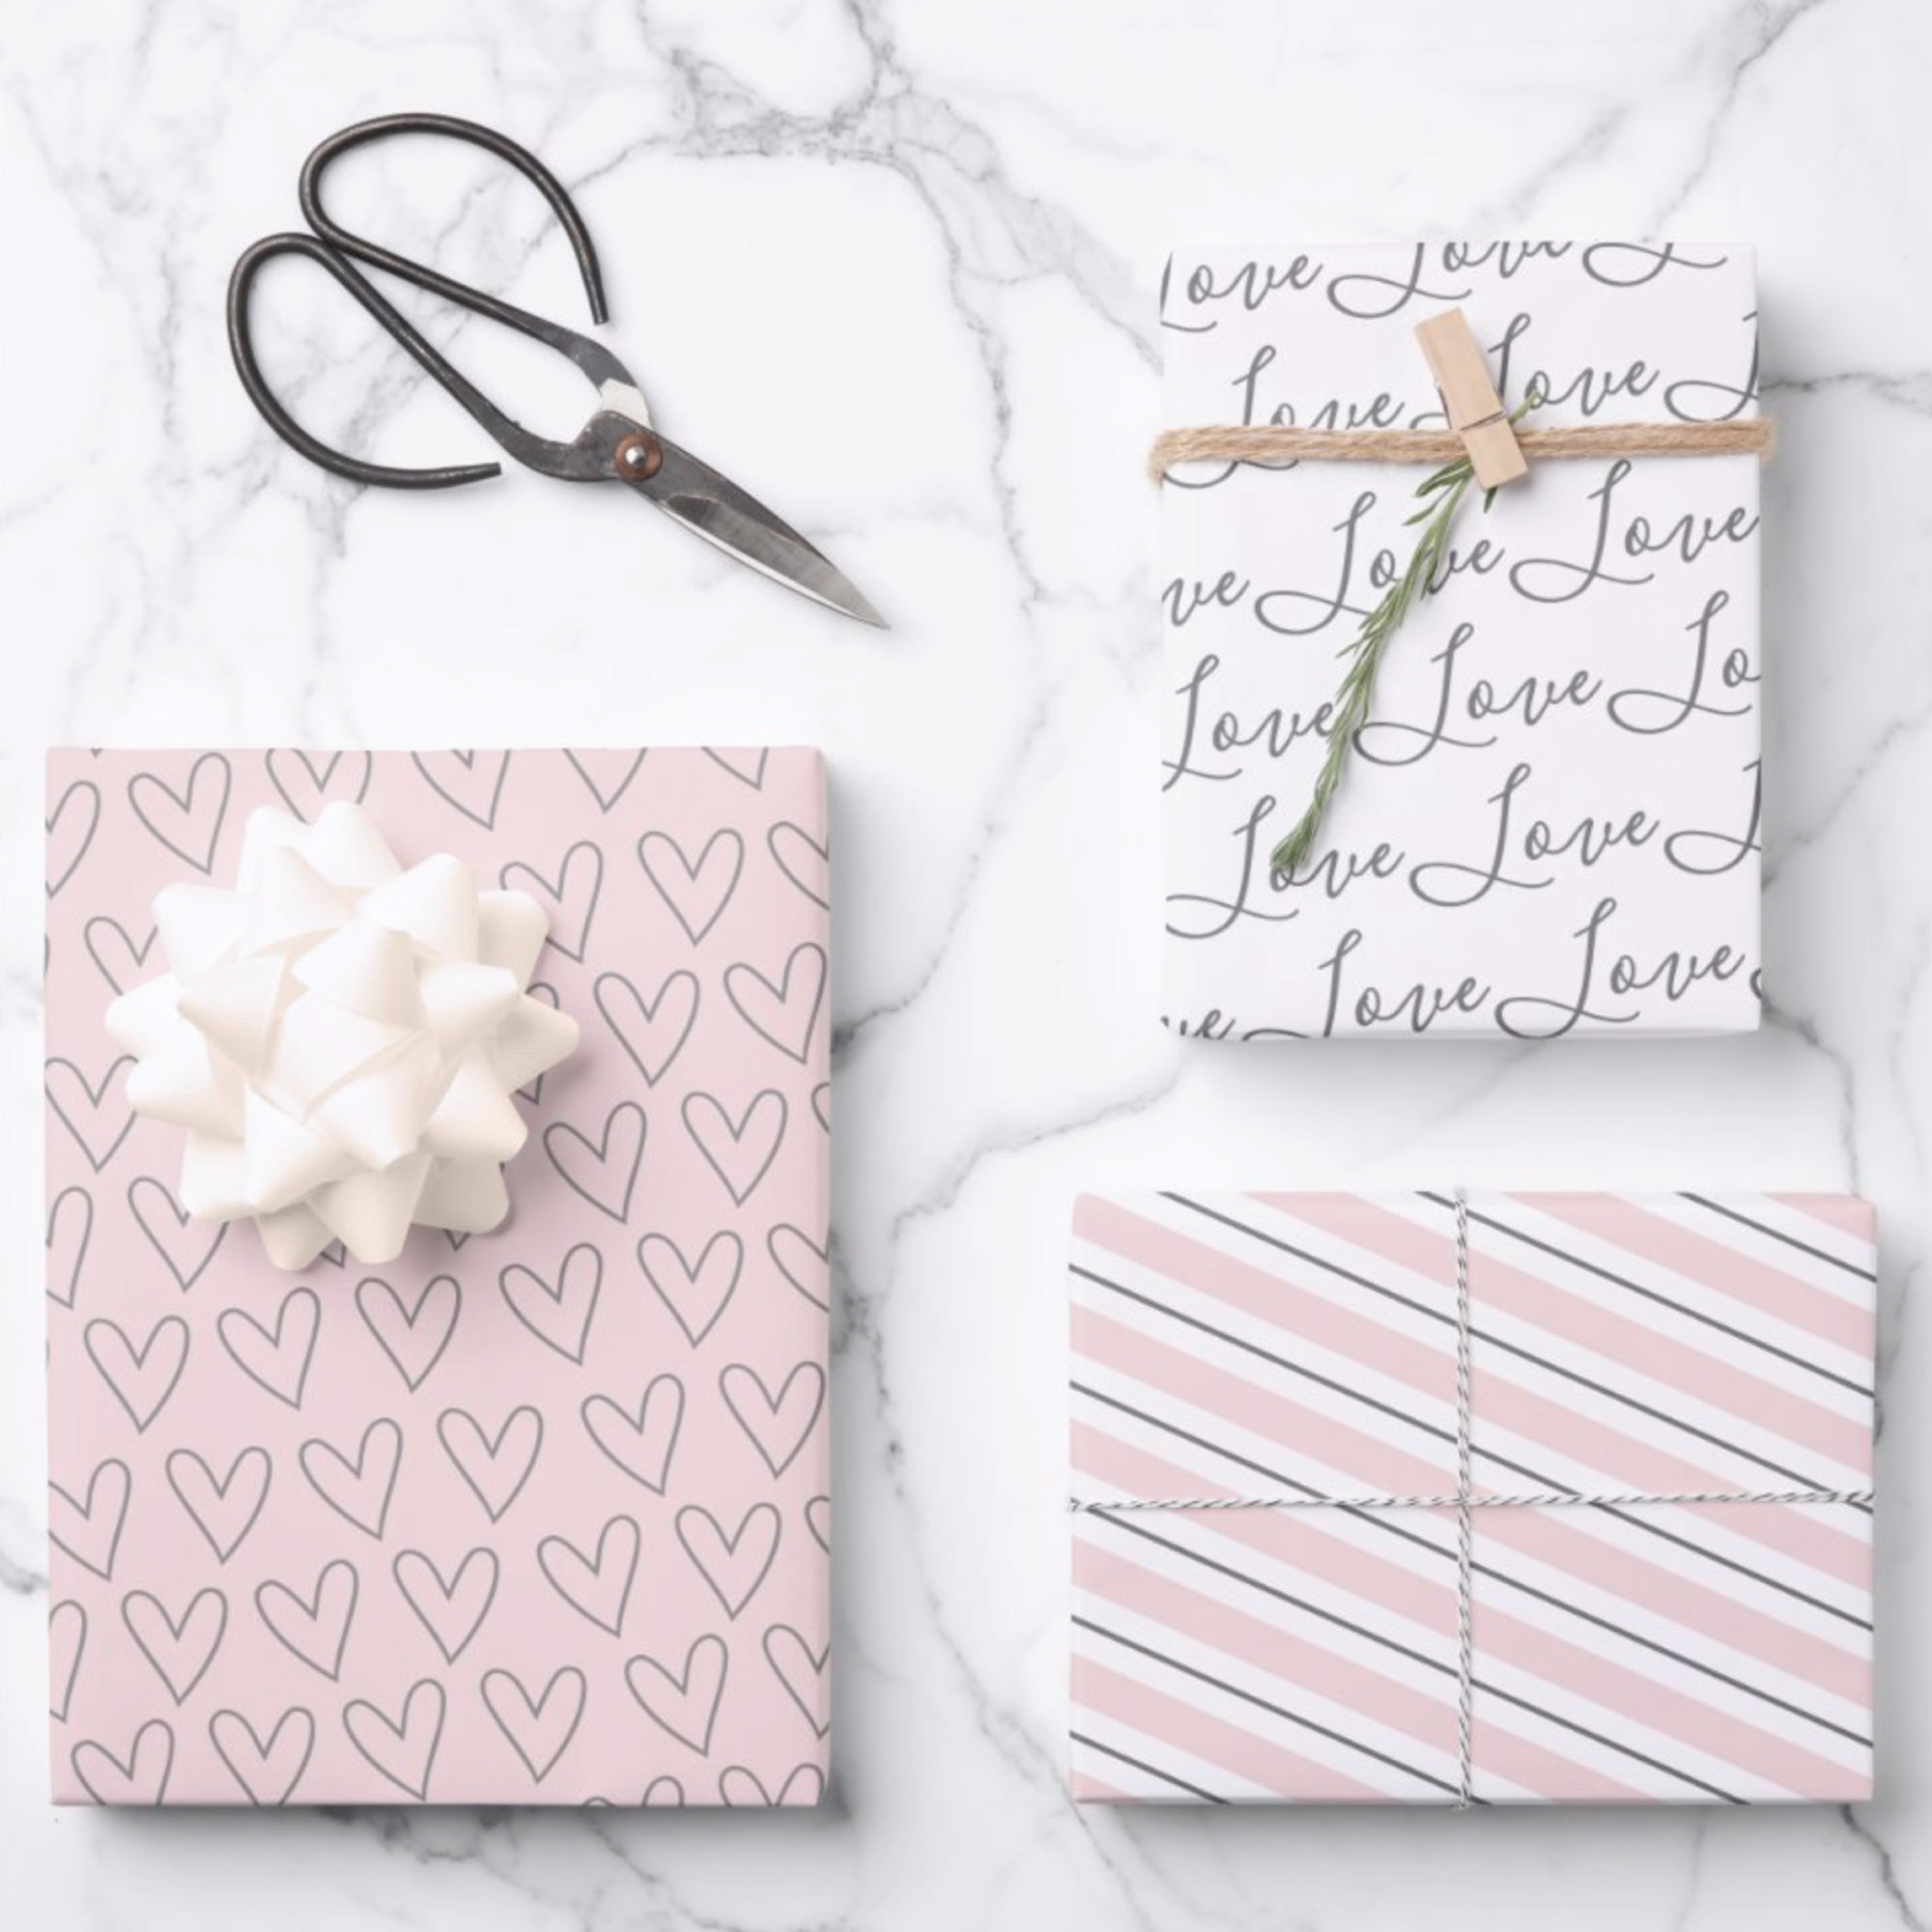 Valentines theme wrapping paper sheets. Set of 3blush pink and grey hand drawn hearts with the word love in a script typography and stripes.